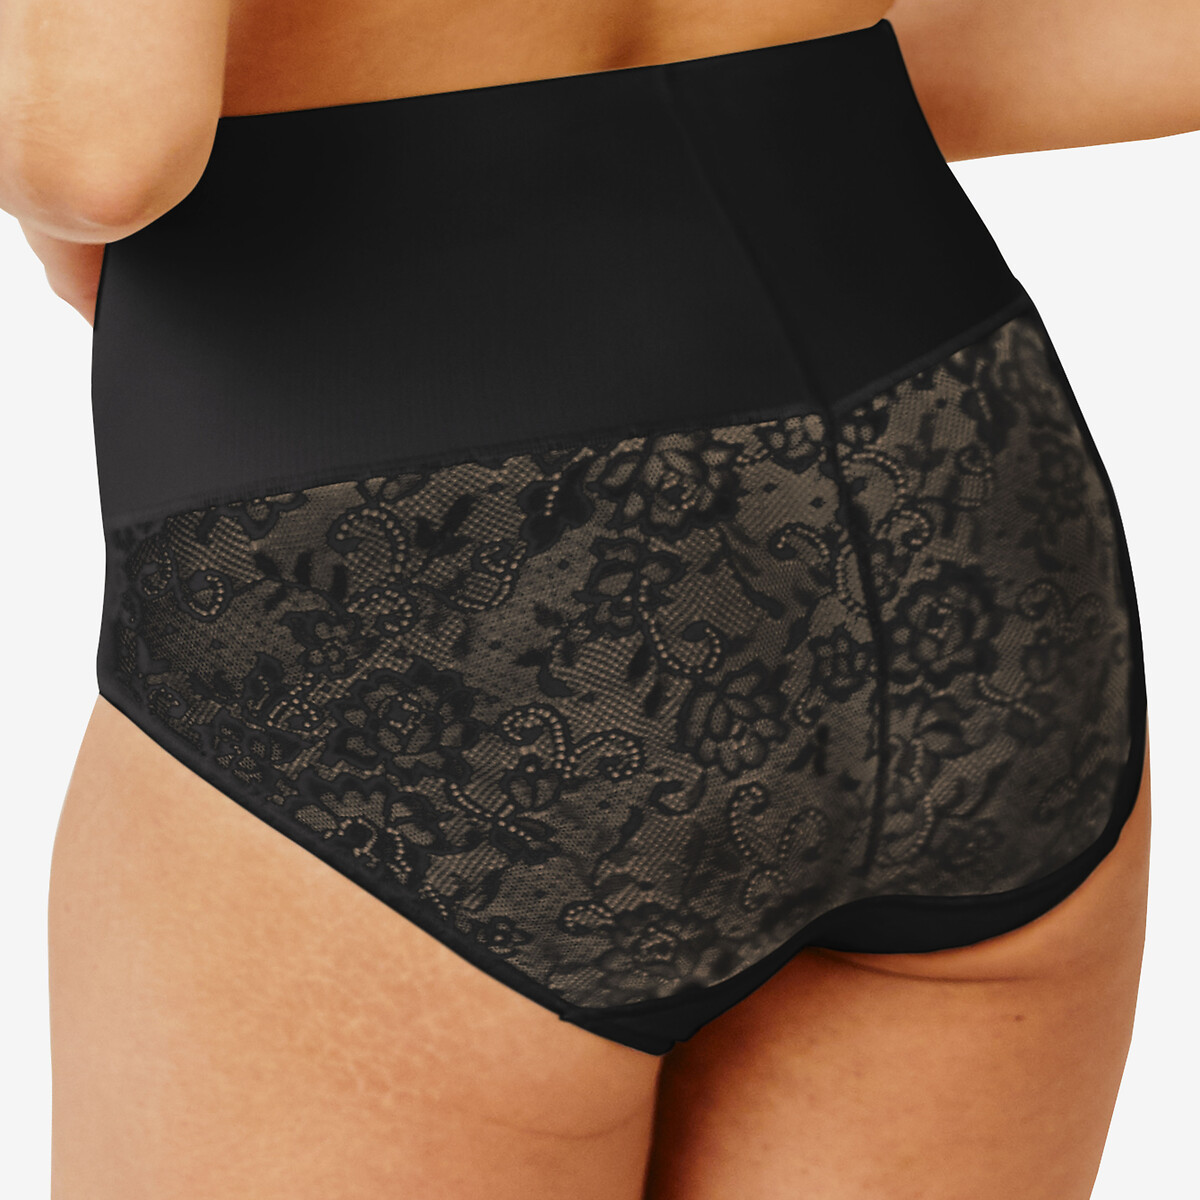 Maidenform Tame Your Tummy Tailored Brief & Reviews